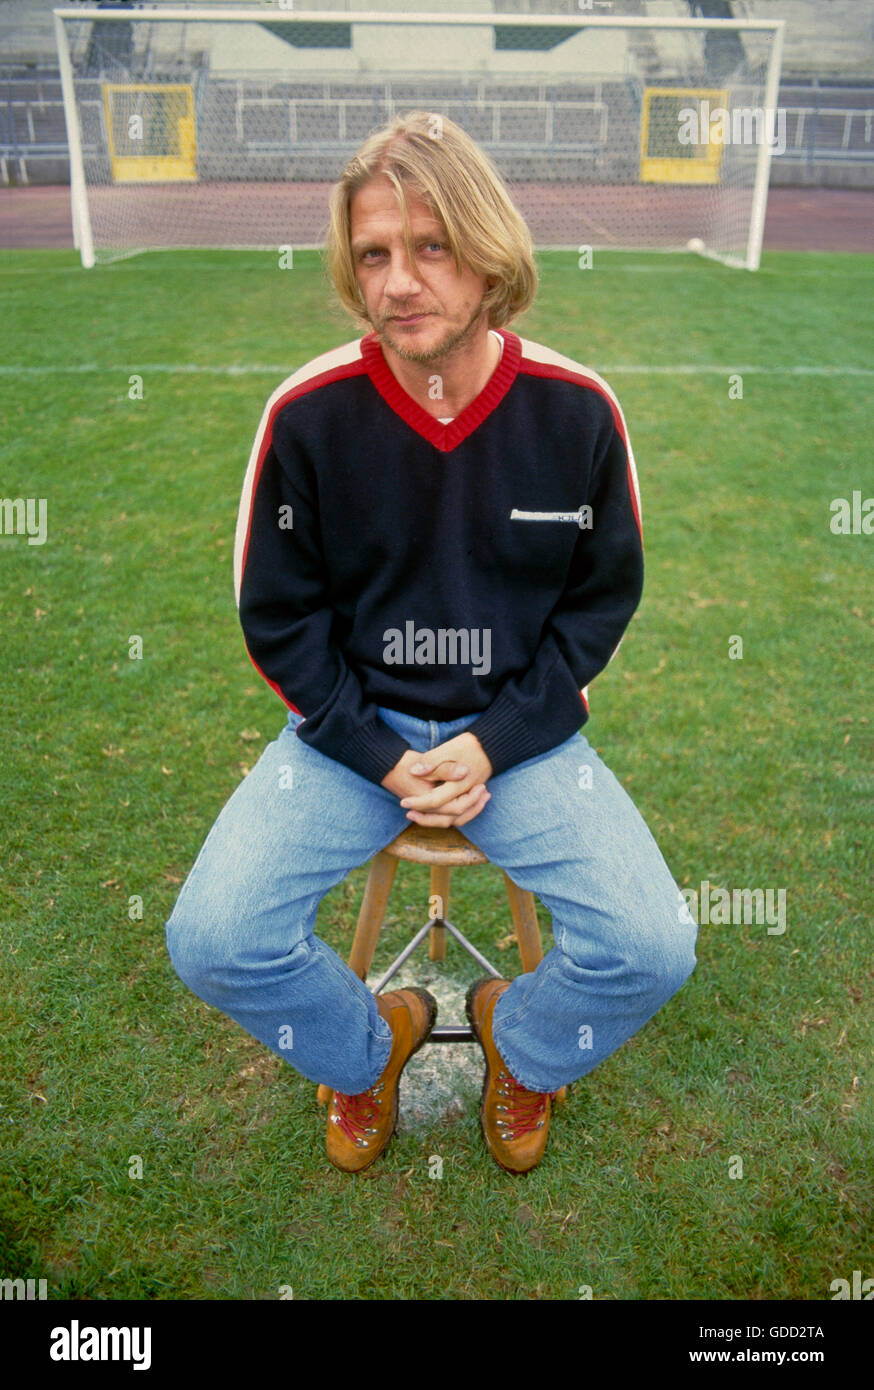 Wortmann, Soenke, * 25.8.1959, German stage director, producer and former football player, full length, sitting on the penalty spot, stadium at the Gruenwalder Strasse, Munich, Germany, 19.10.1997, Stock Photo